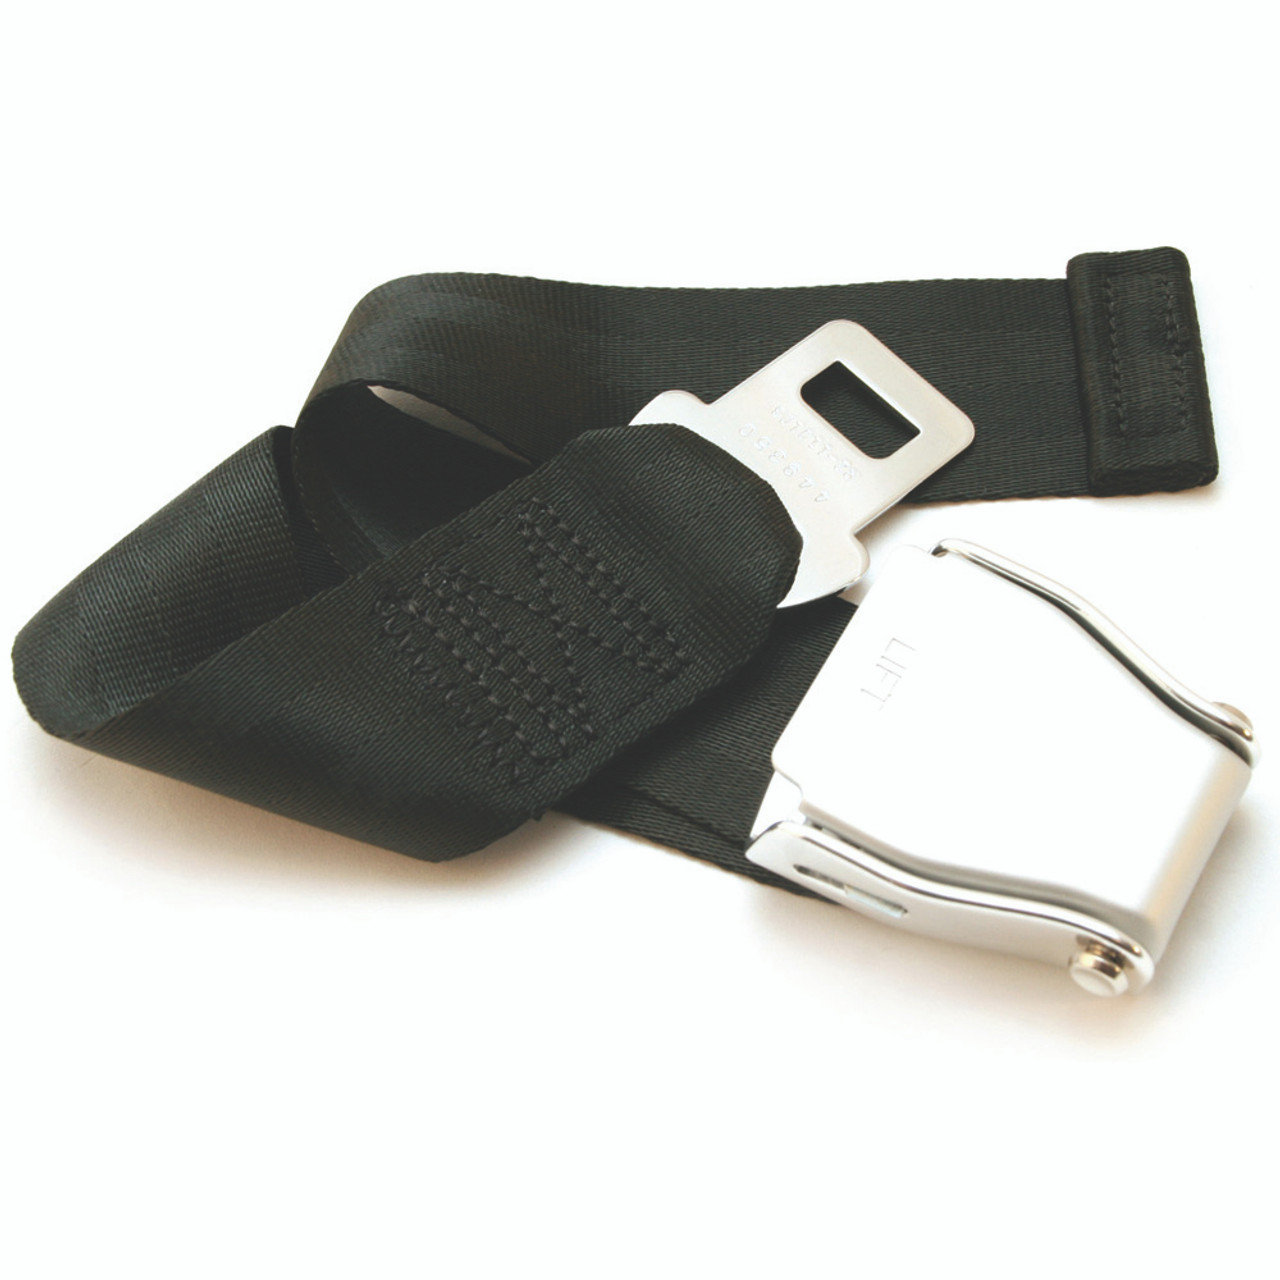 Airplane Belt Extender - E8 Safety Certified (Type A)